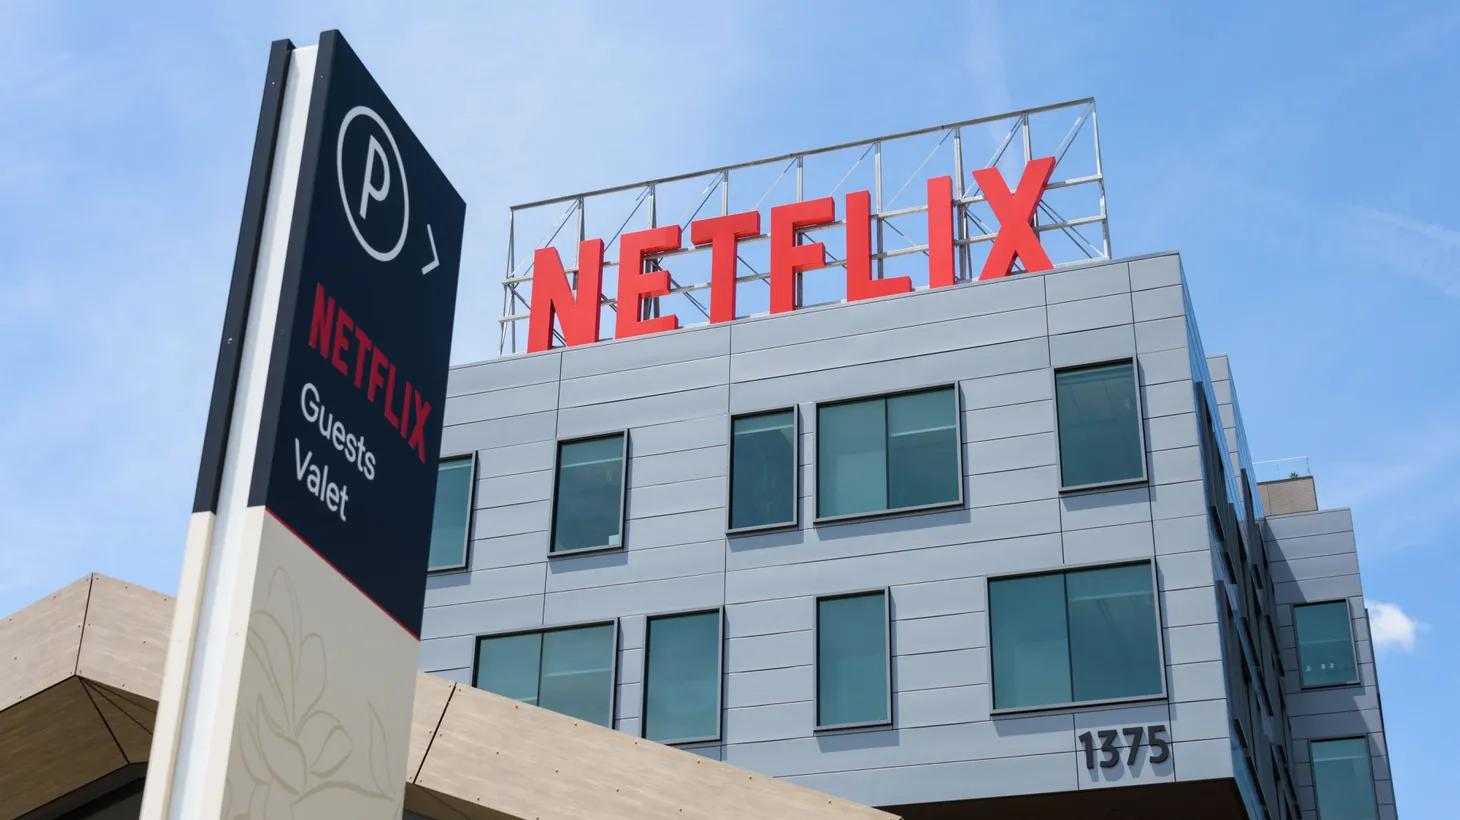 As the actors’ strike continues, Netflix announces a price hike. What does this mean for subscribers and the streamer?